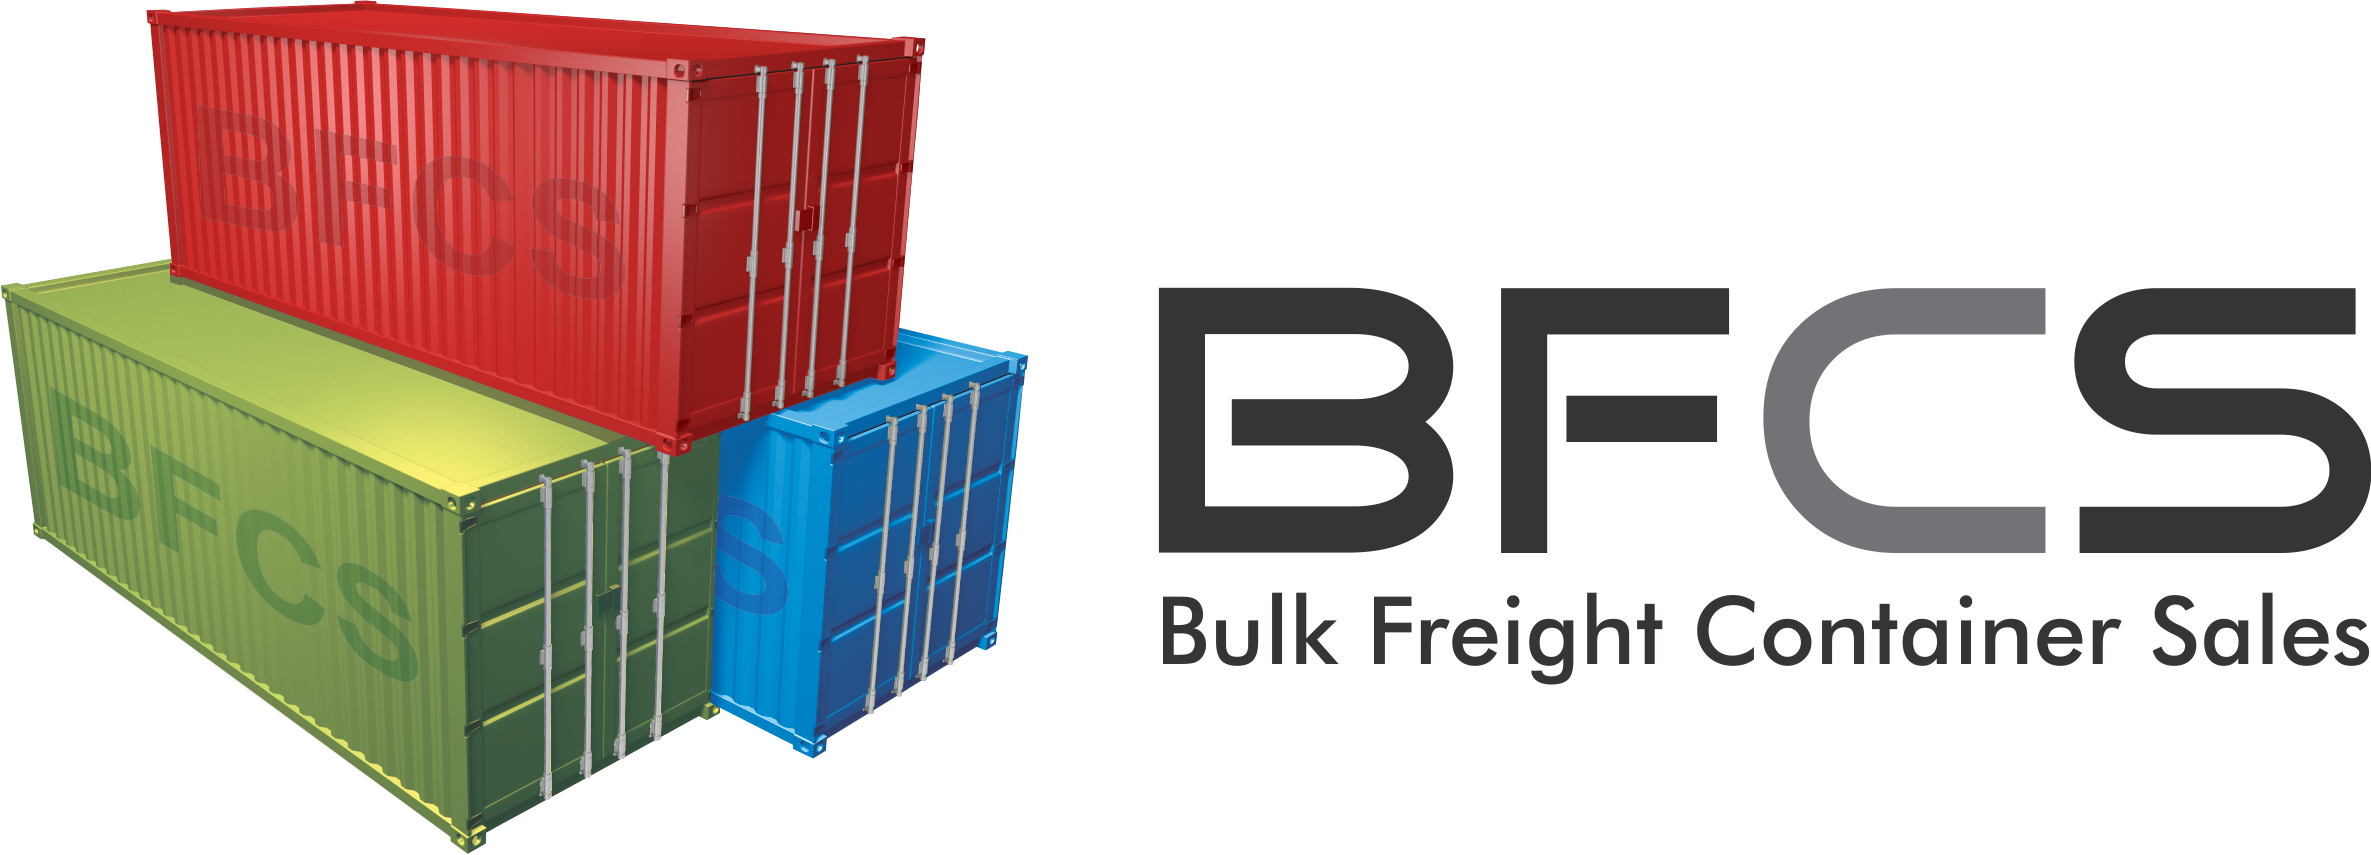 Find Bulk Freight Shipping Container Sales & Conversions (Pty) Ltd's adverts listed on Junk Mail